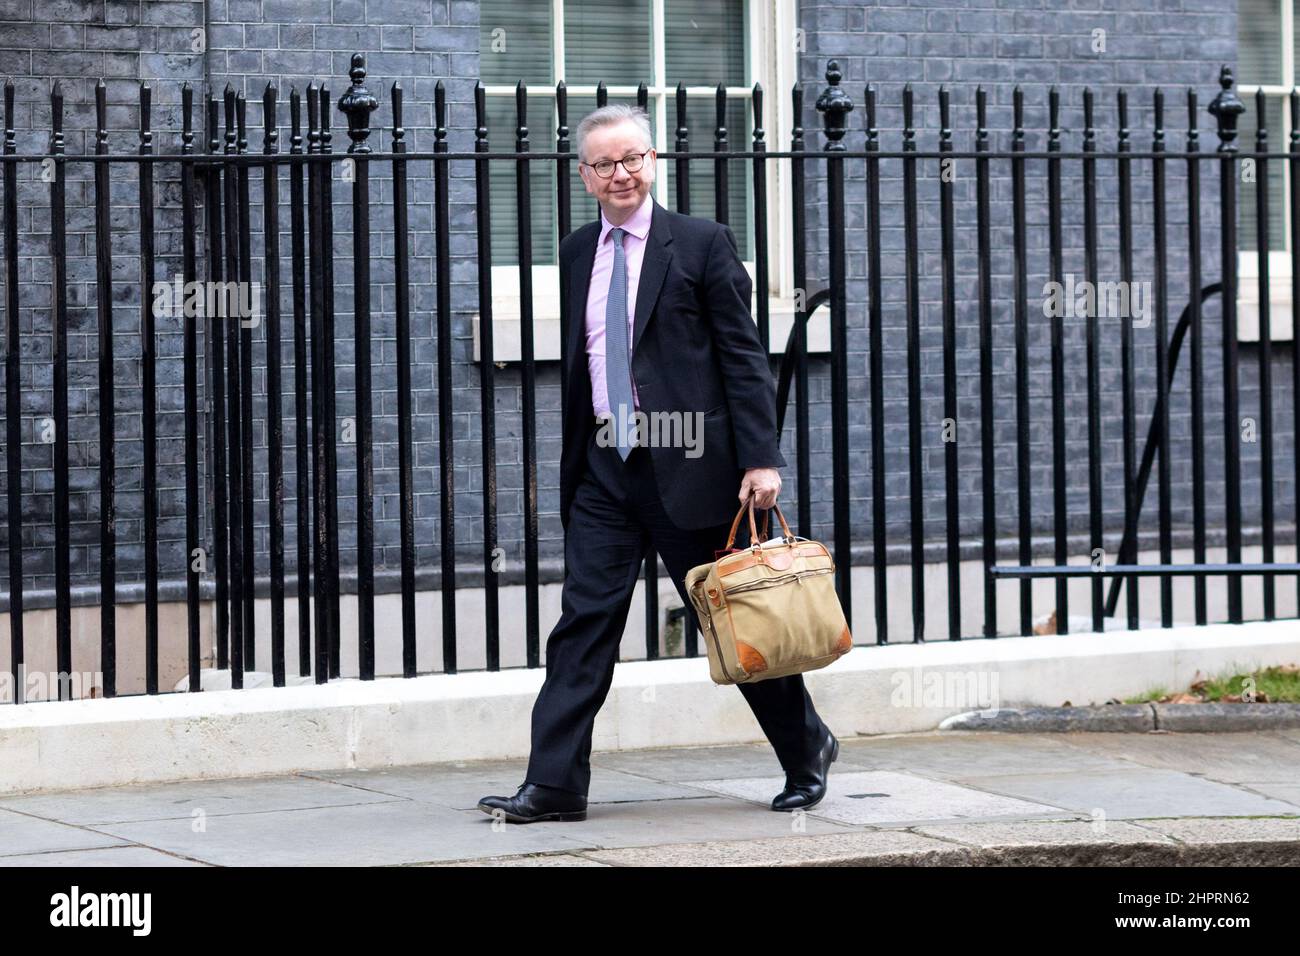 Michael Gove, UK Downing Street Secretary of State for Levelling Up, Housing and Communities leaves No. 10 ahead of this week’s Prime Minister Questio Stock Photo